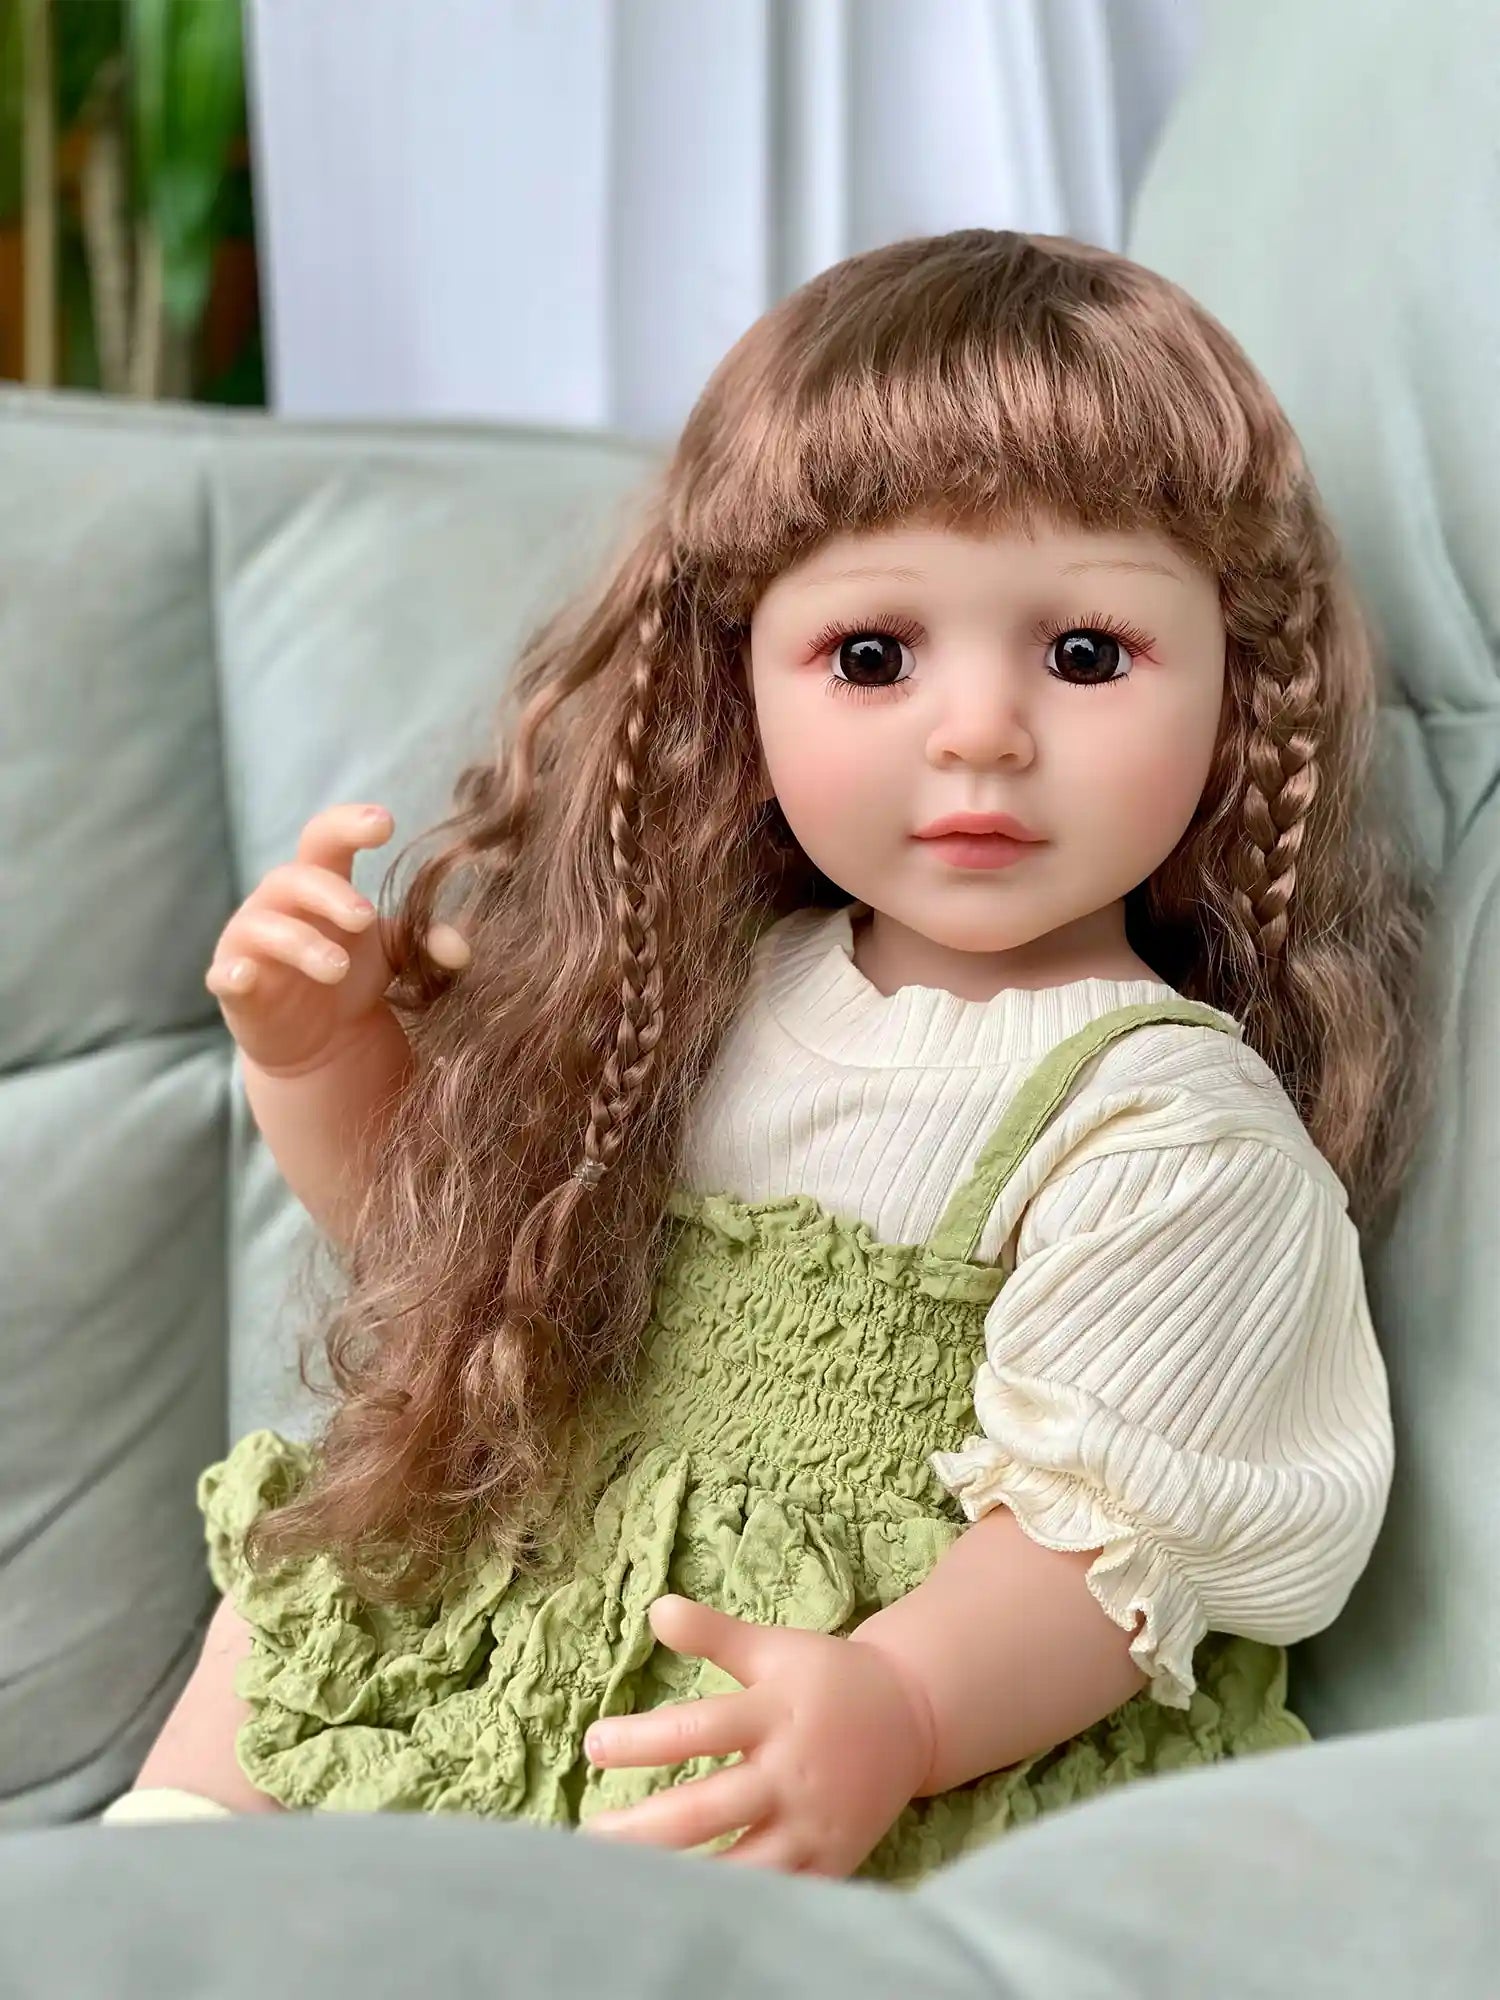 Doll with brown braids and green dress sitting on a grey sofa.